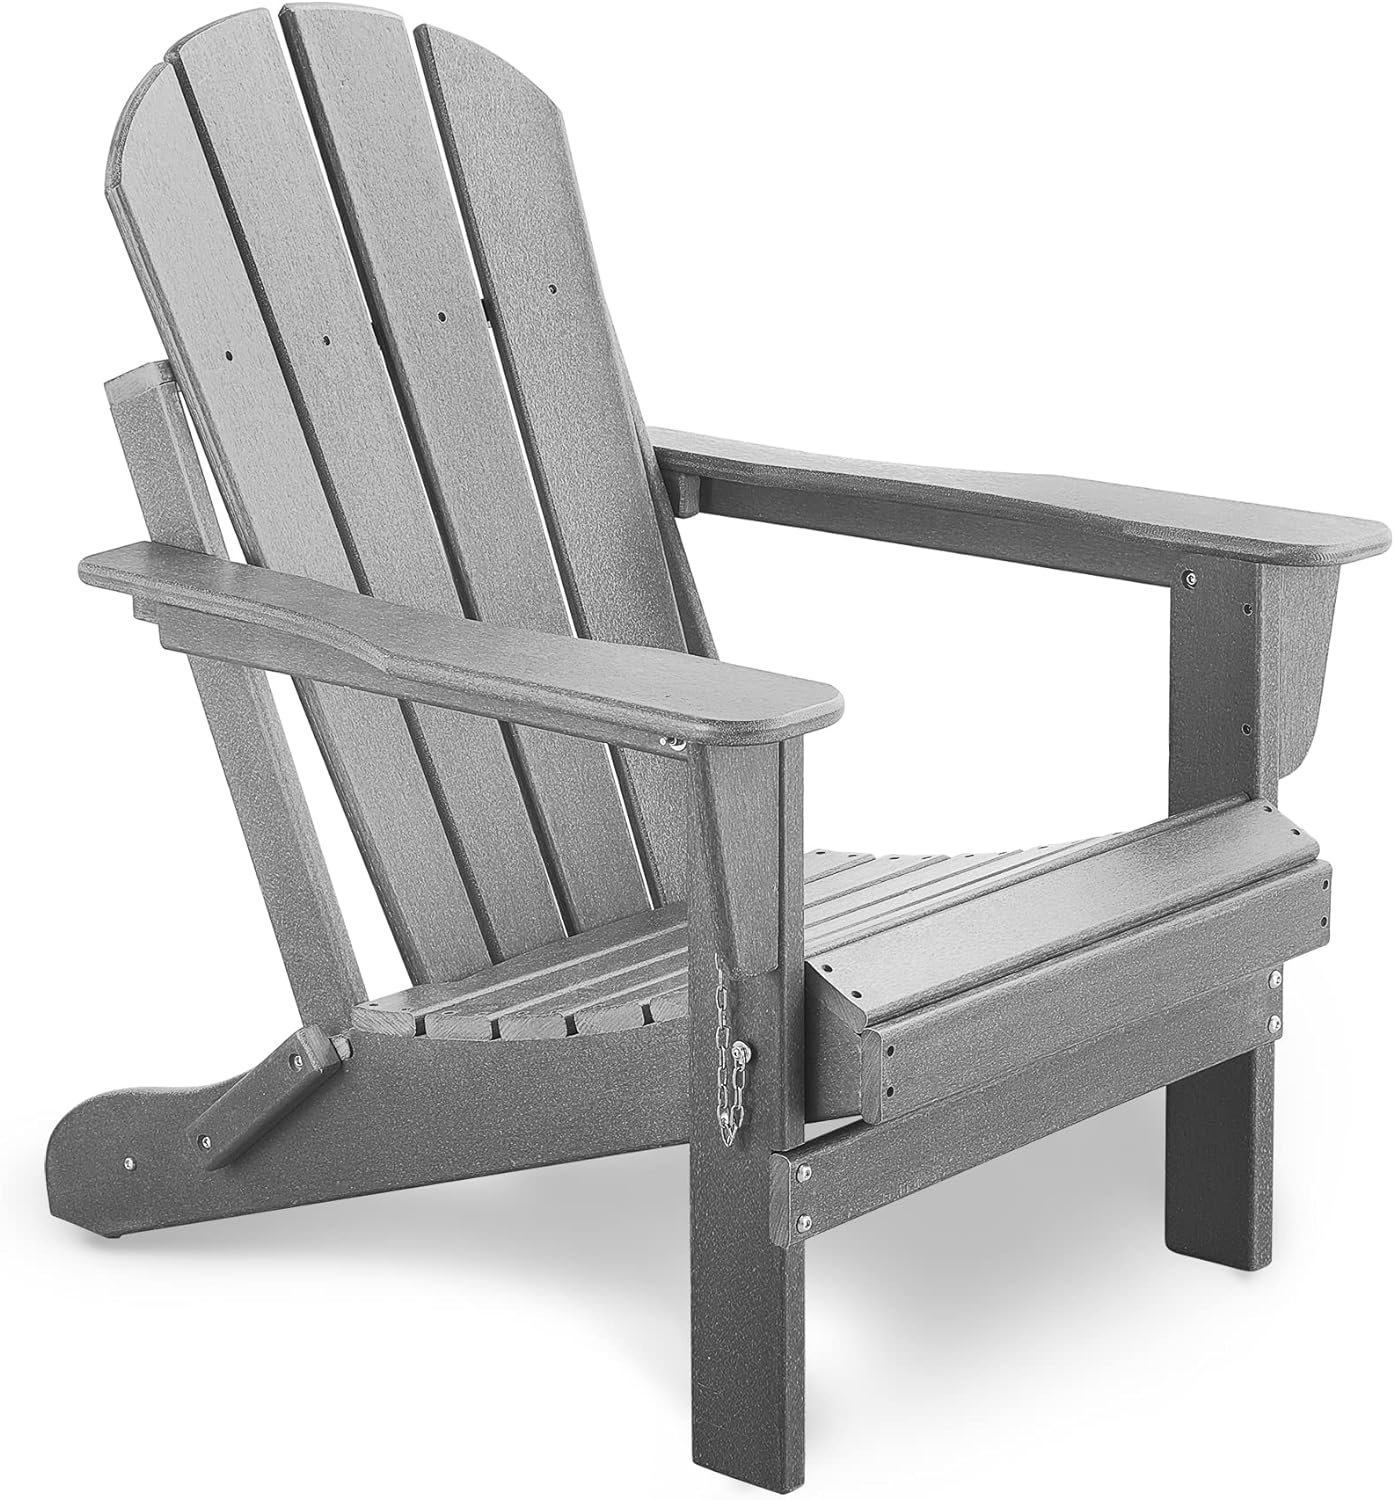 WILLIAMSPACE Folding Adirondack Chair Outdoor, Weather Resistant Patio Chairs for Garden Deck Backyard, Easy Maintenance & Classic Adirondack Chairs Design - Grey